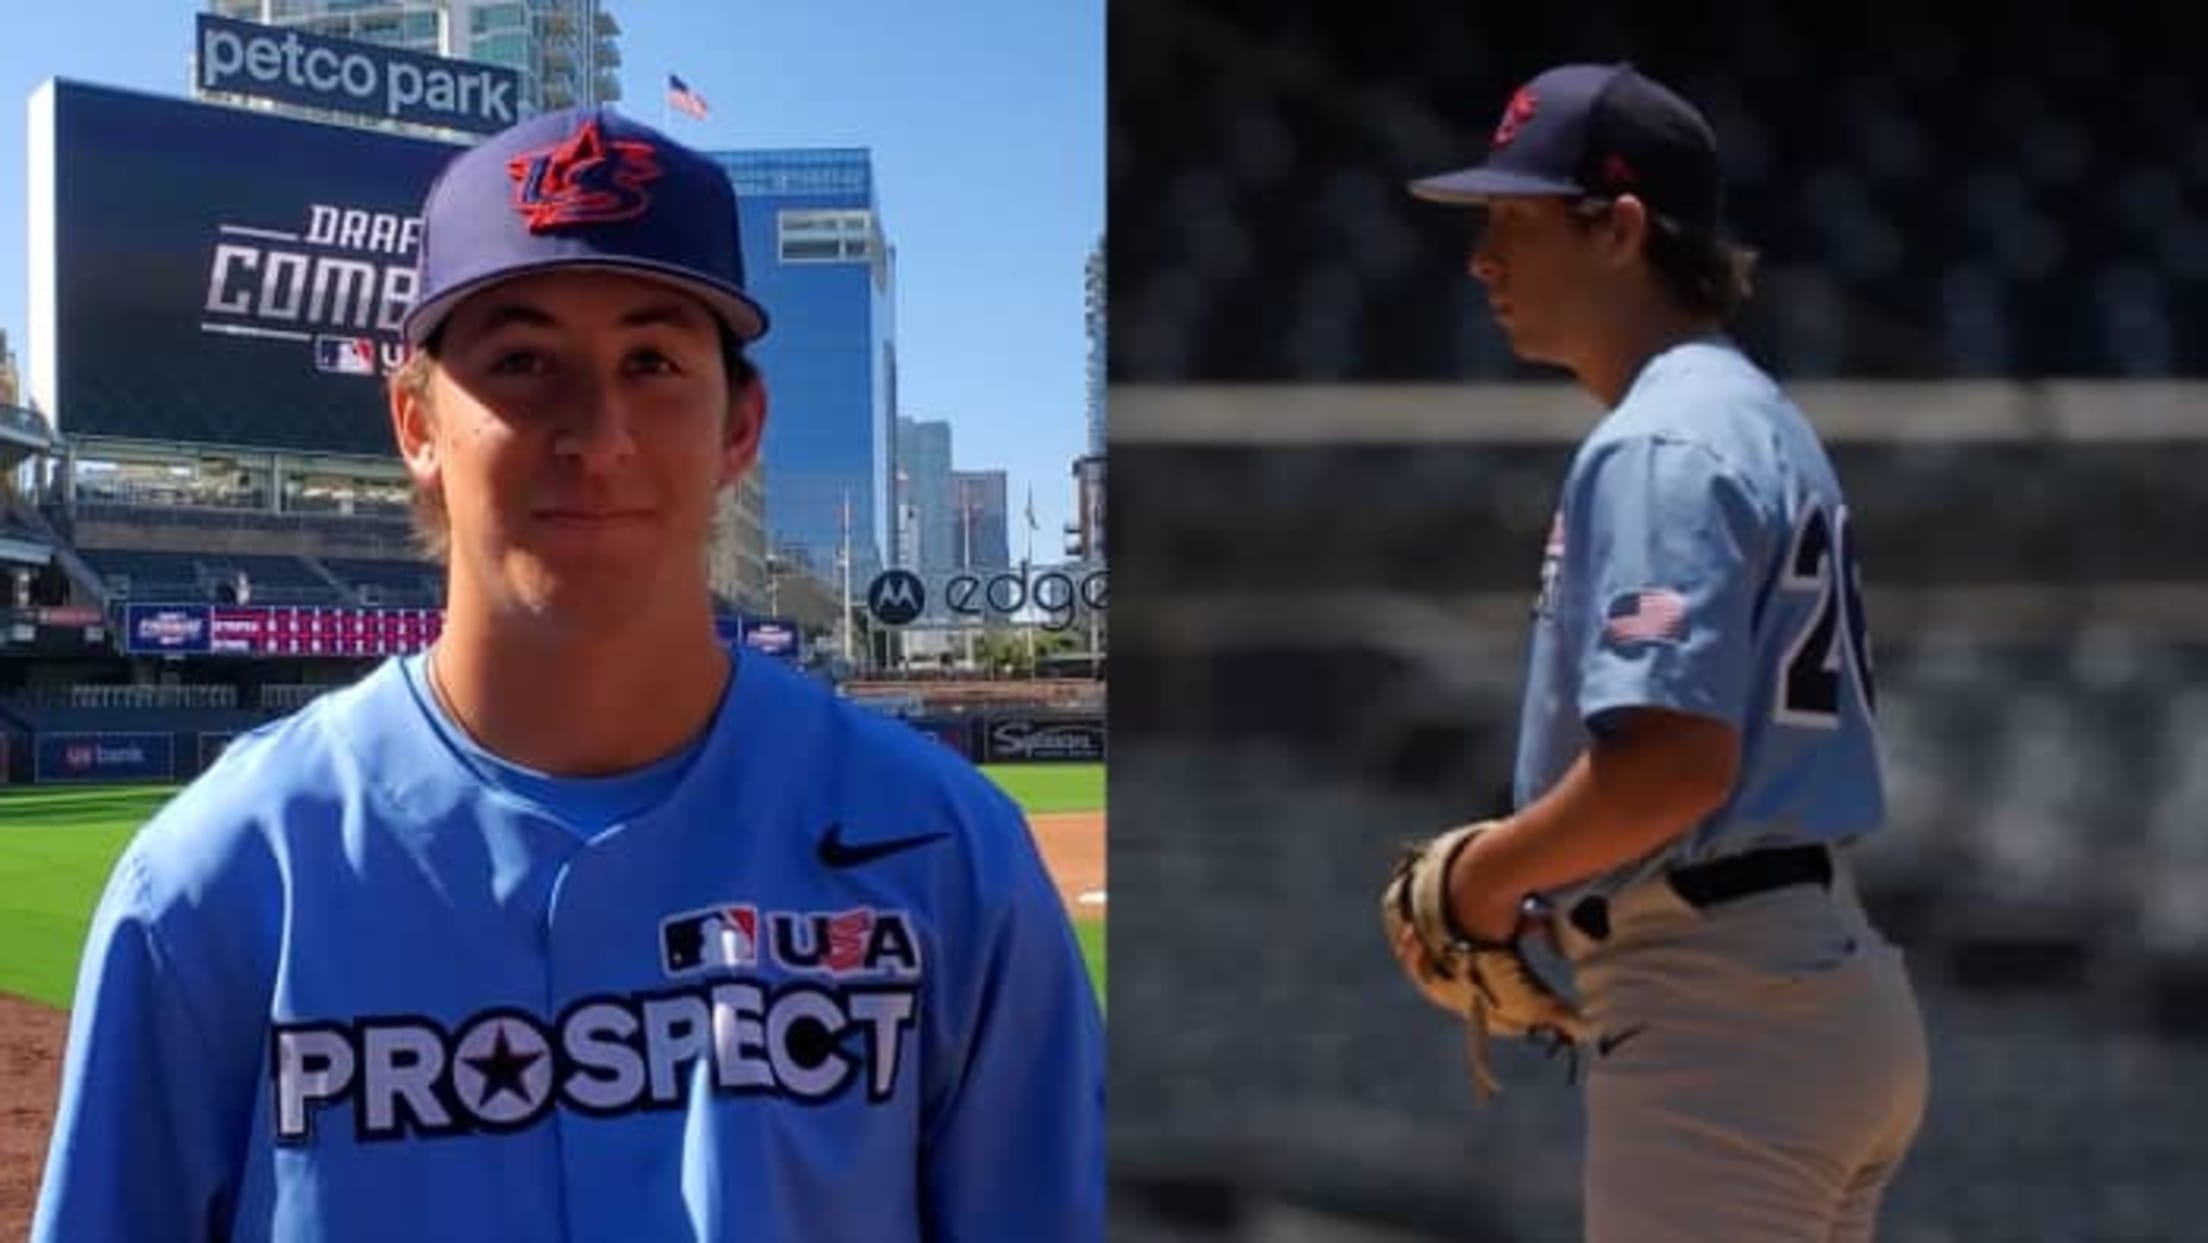 MLB Draft Combine at Petco Park provides new platform of exposure for  prospects and July draft  The San Diego UnionTribune